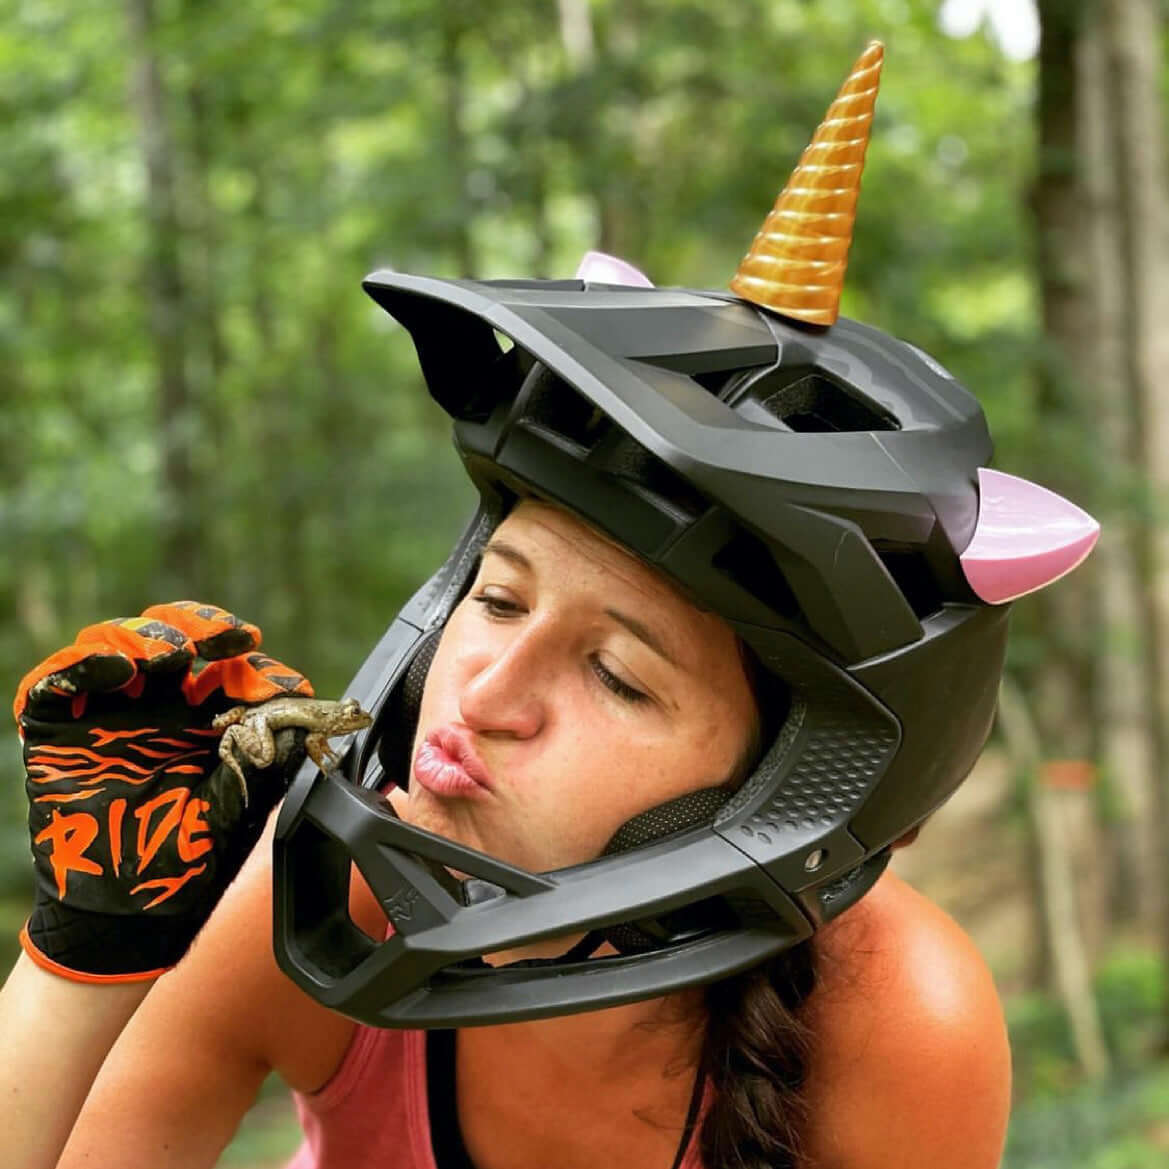 Unicorn horn and pink cat ears on a bicycle helmet